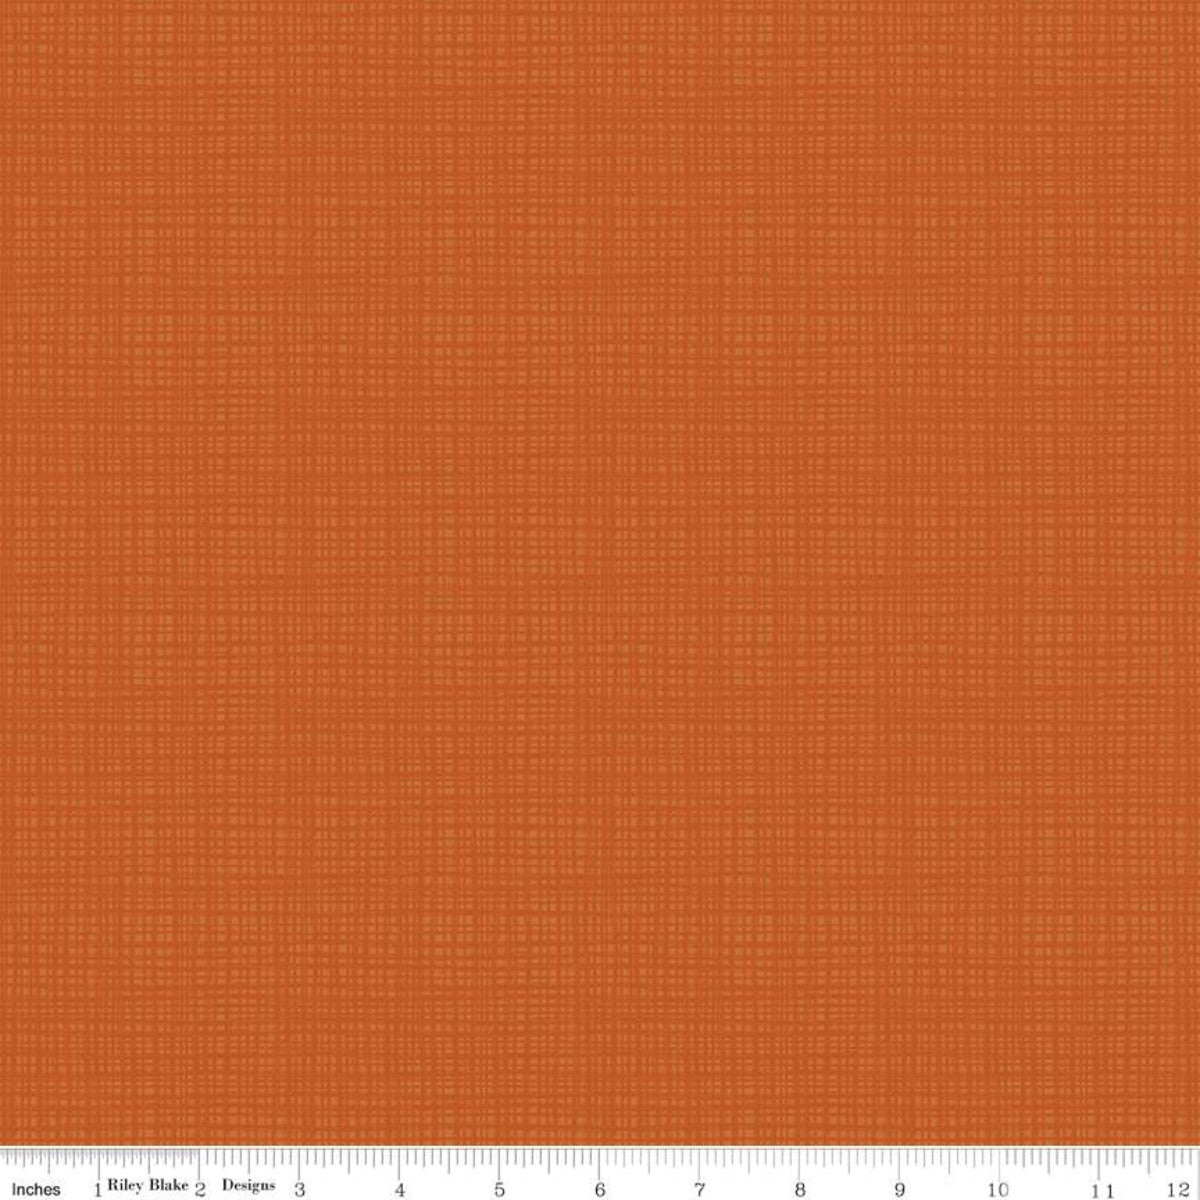 Texture Persimmon yardage by Sandy Gervais